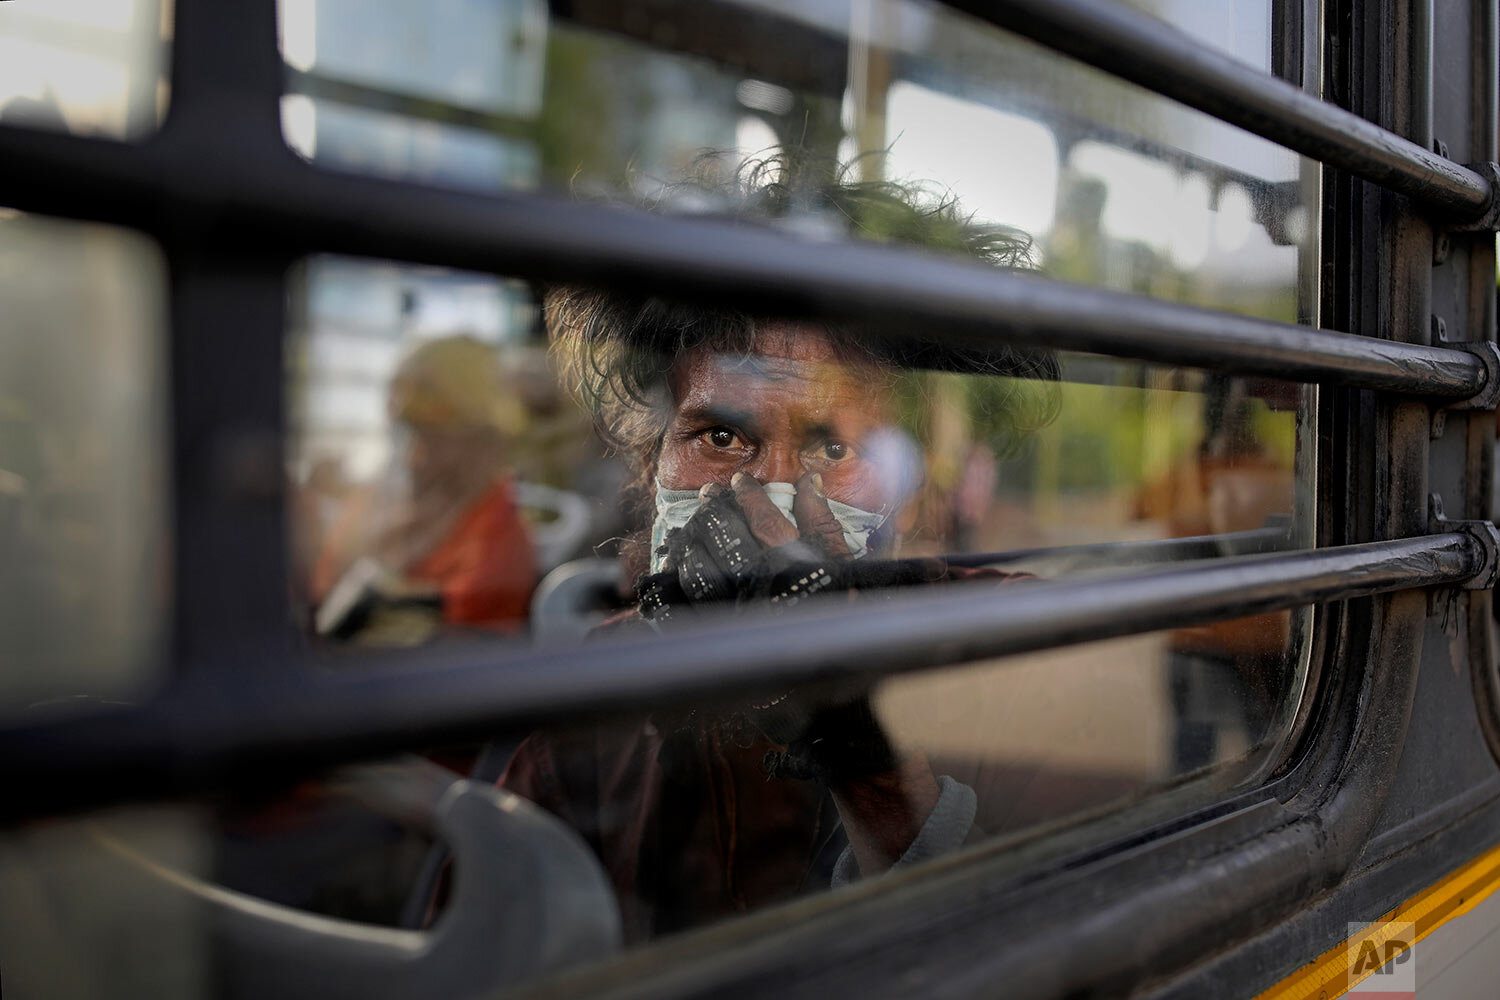  An Indian homeless man sits in a bus as he is being evicted with other homeless people and migrant laborers from the banks of Yamuna River where they have been squatting during lockdown in New Delhi, India, Wednesday, April 15, 2020. (AP Photo/Altaf